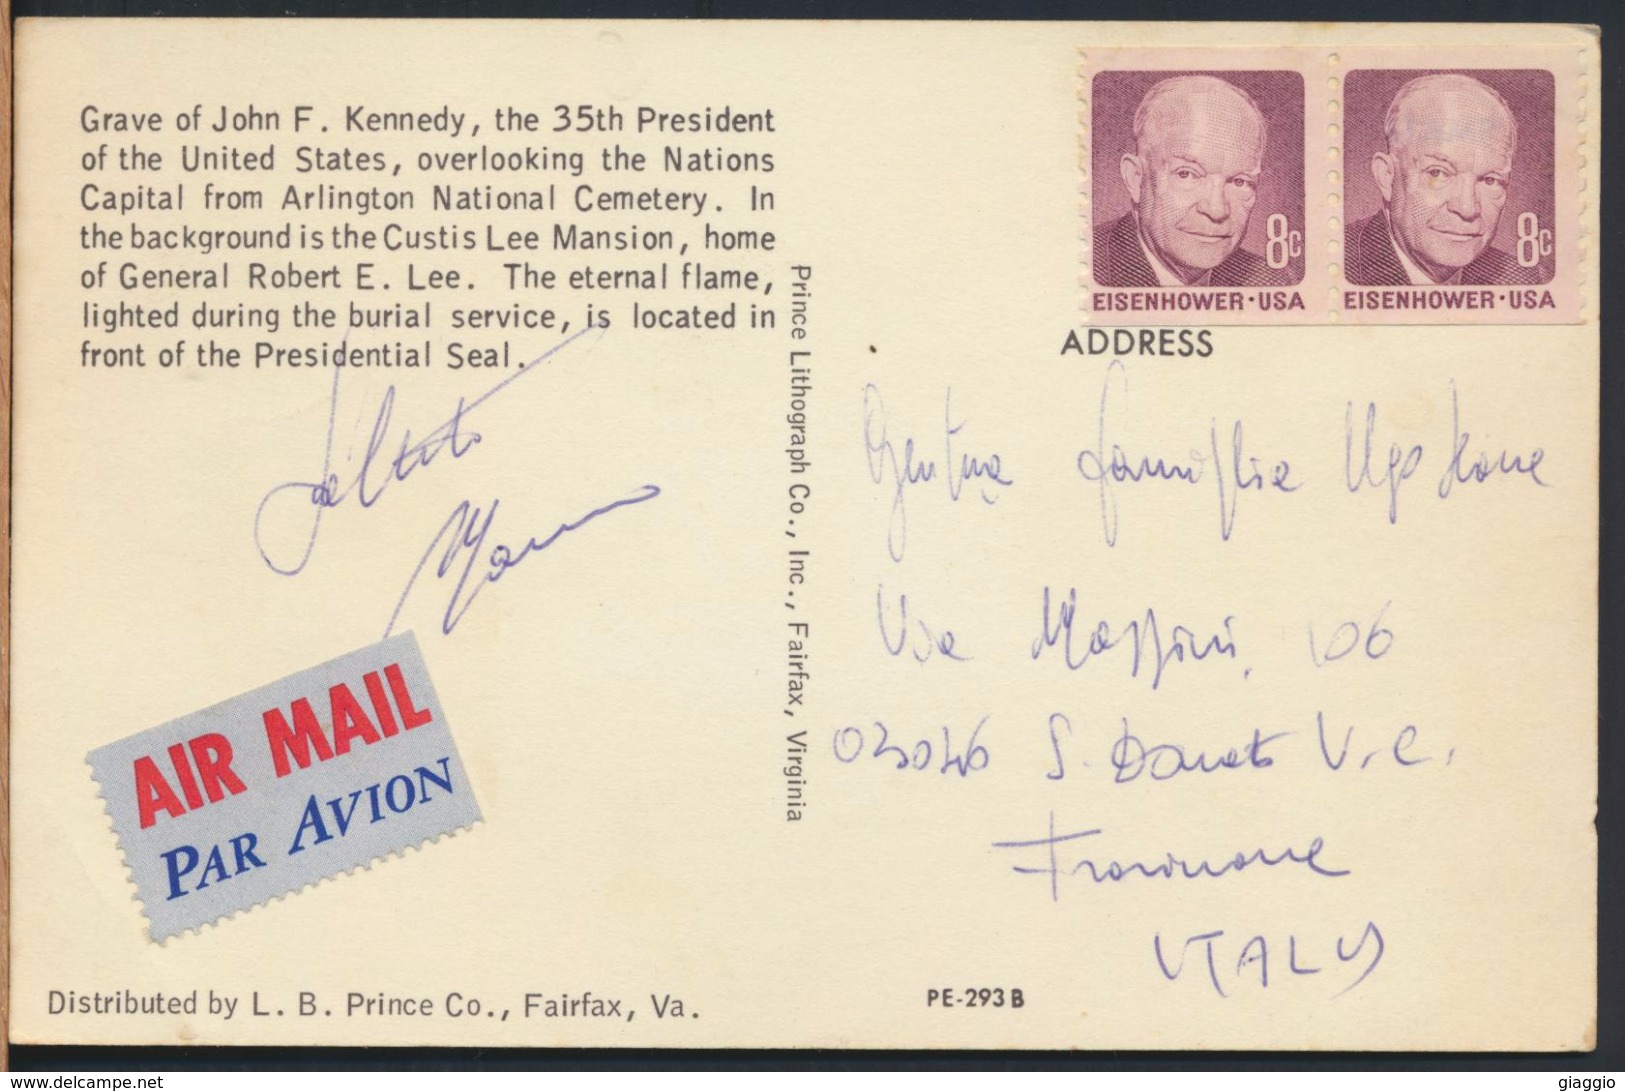 °°° 2173 - VA - ARLINGTON - GRAVE OF J.F. KENNEDY FROM NATIONAL CEMETERY - With Stamps °°° - Arlington